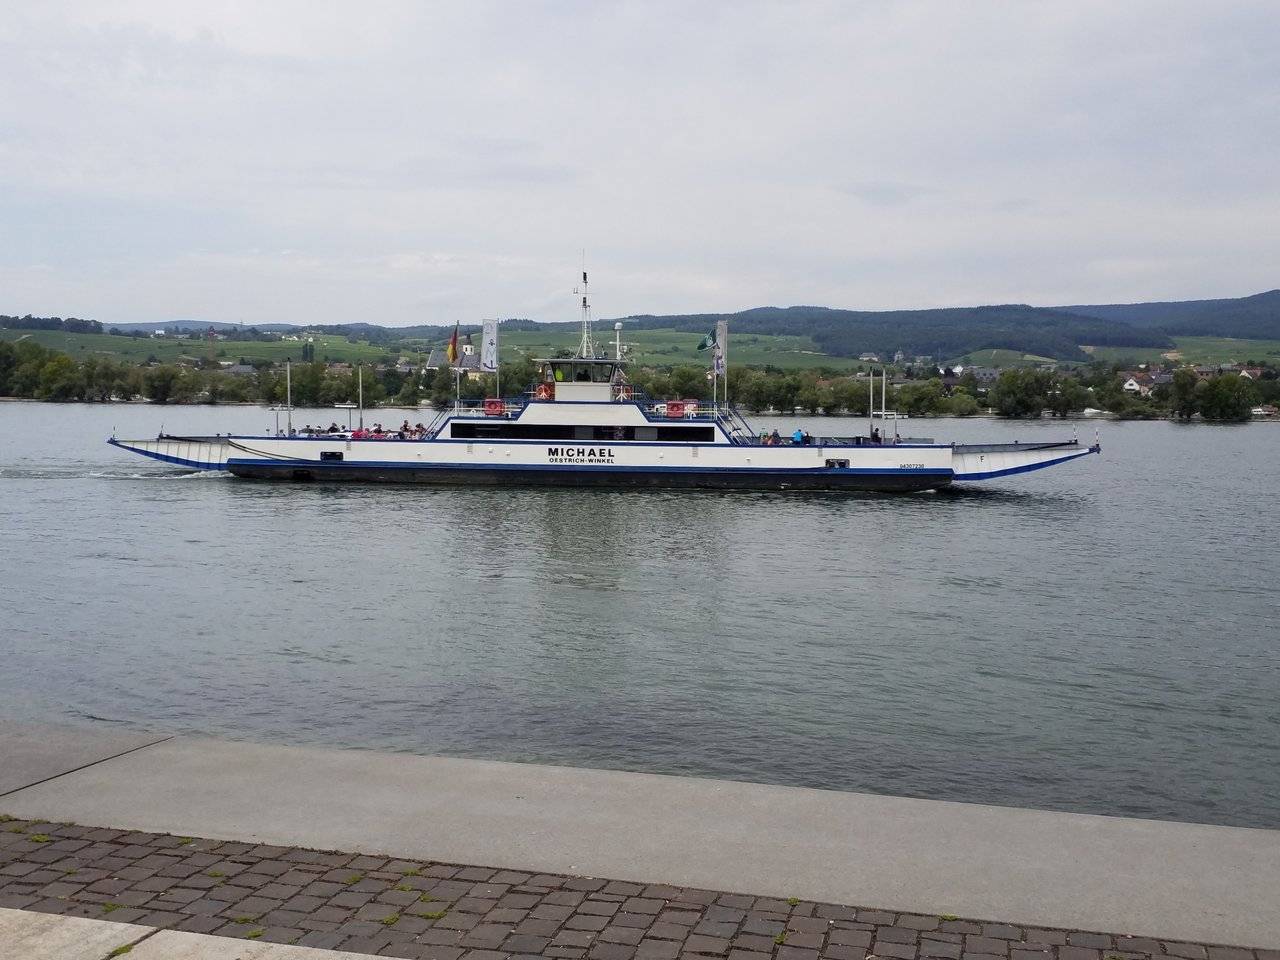 Ferry departing with another group of passengers for Oestrich-Winkel